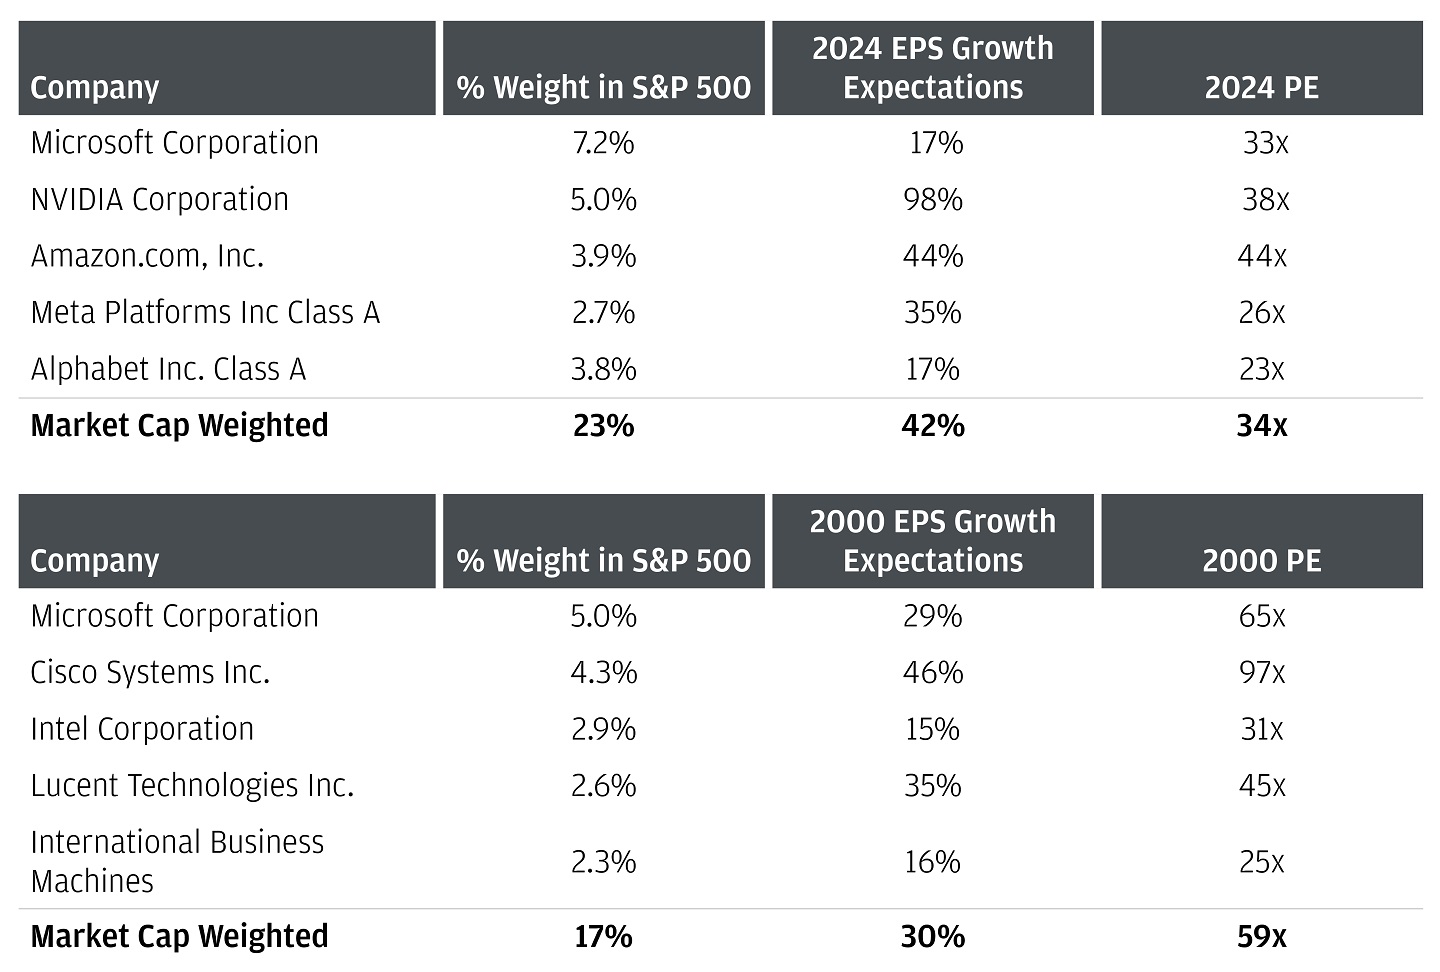 Table showing earnings growth and P/E ratios for leading tech stocks in 2000 and 2024.